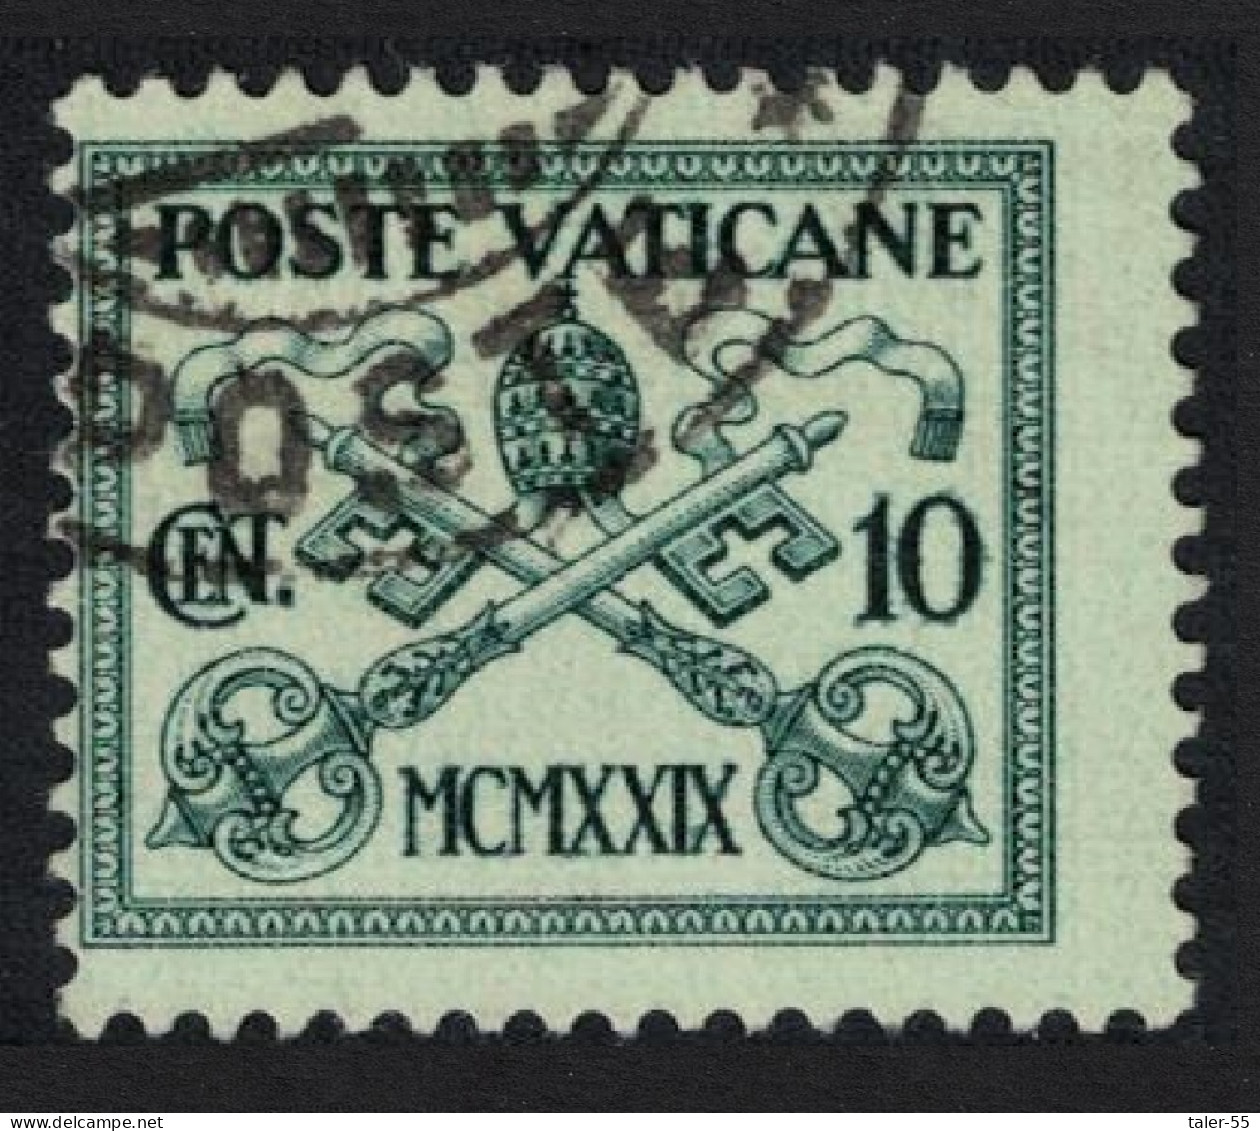 Vatican Papal Tiara And St Peter's Keys 10c FIRST ISSUE 1929 Canc SG#2 MI#2 Sc#2 - Usati